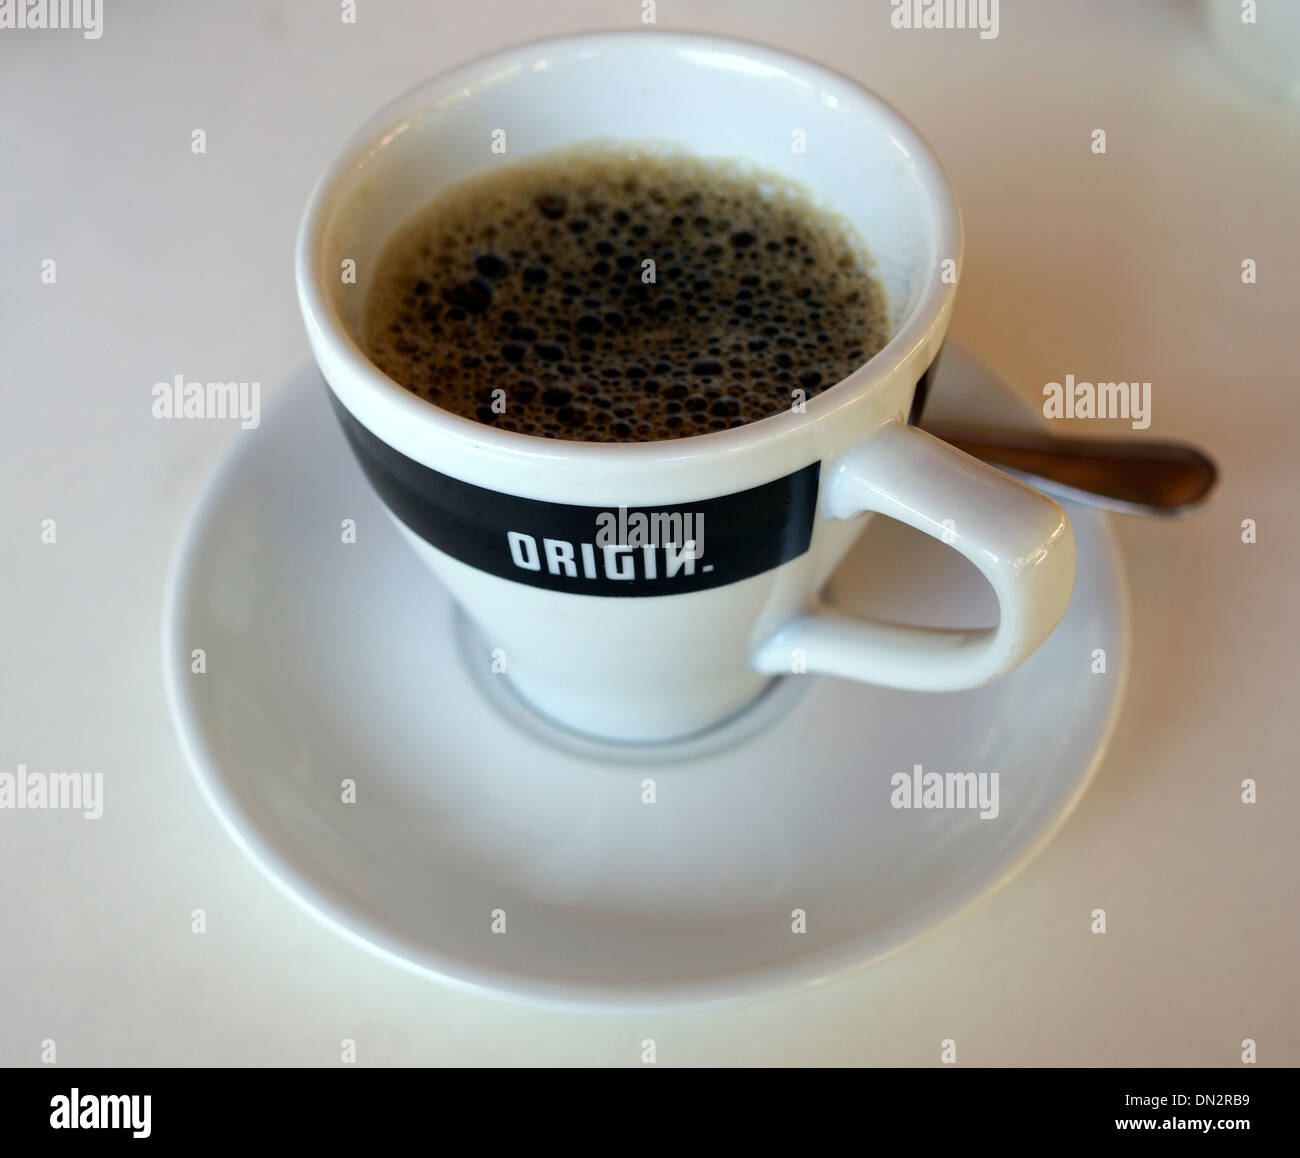 Freshly poured cup of black coffee with logo on side of cup. Stock Photo